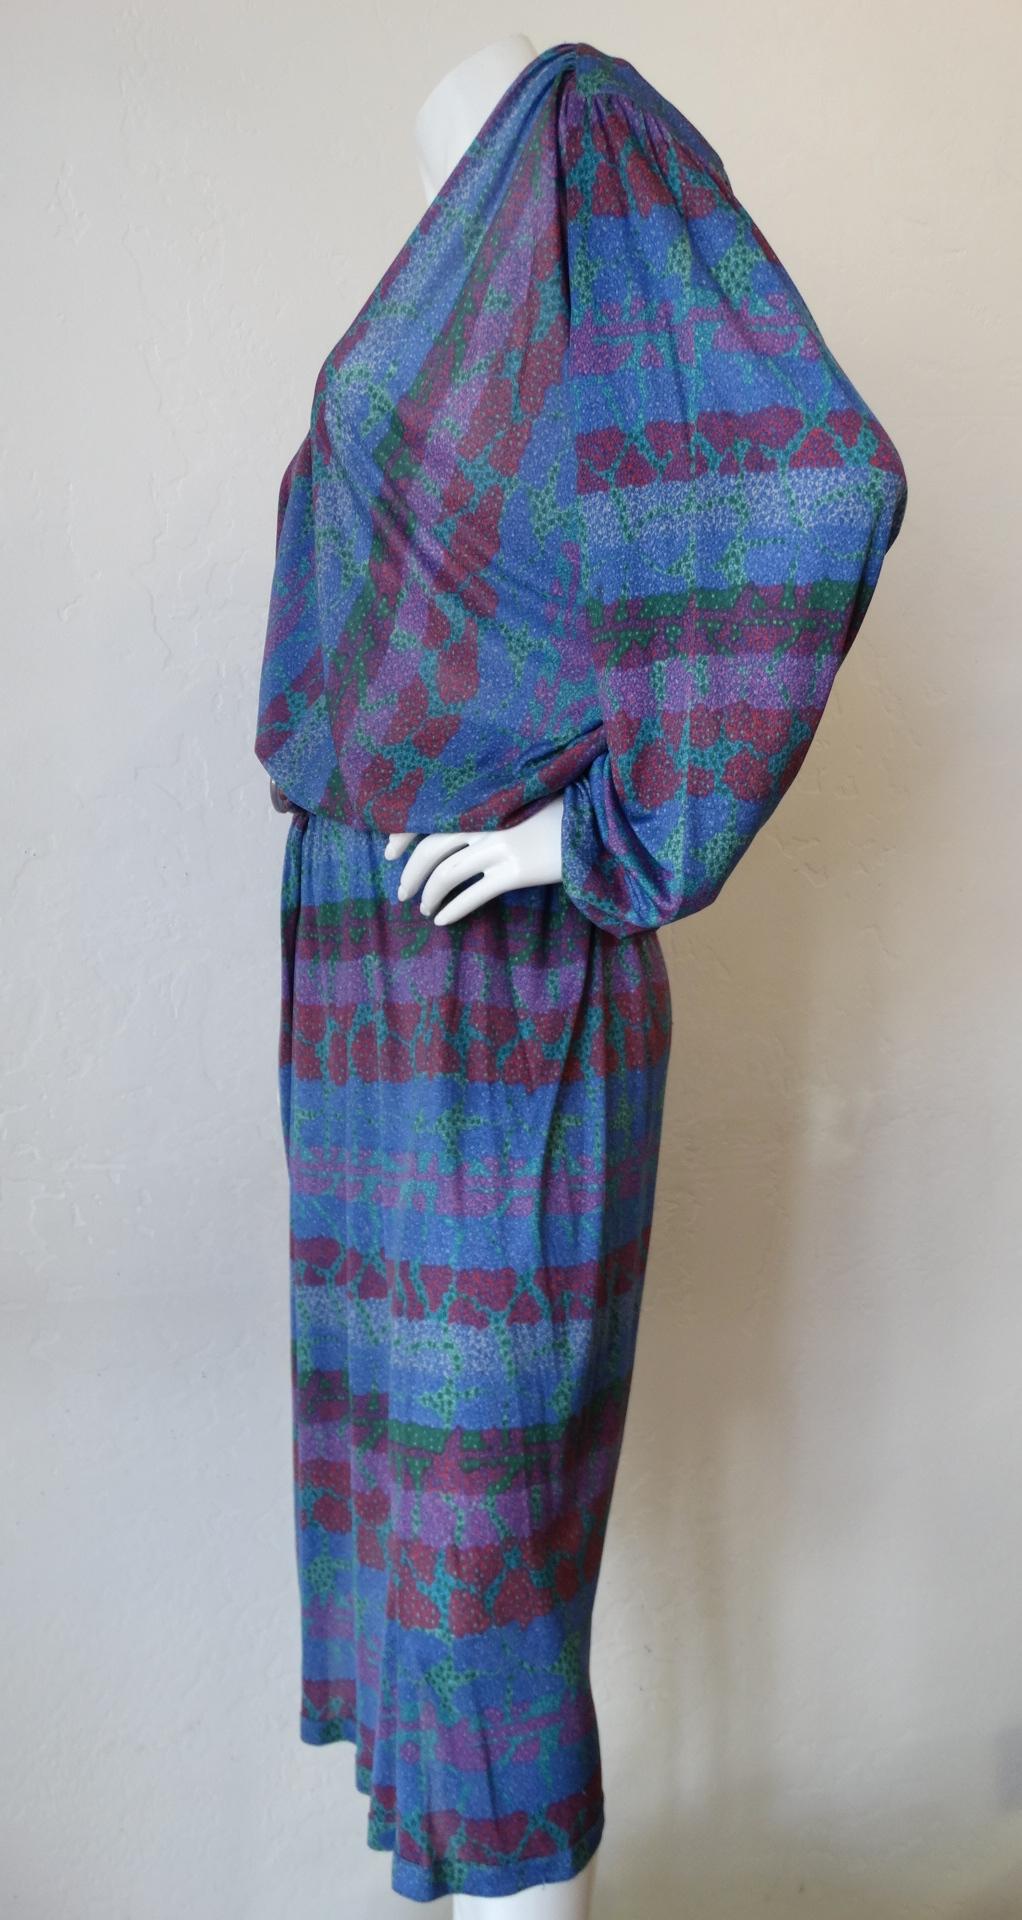 Searching For Some Missoni In Your Life? Look no further! This 1970's silk Missoni dress is exactly what you need! An allover abstract motif of blue, green, red and purple give off all those 70's vibes. The silk fabric falls effortlessly and